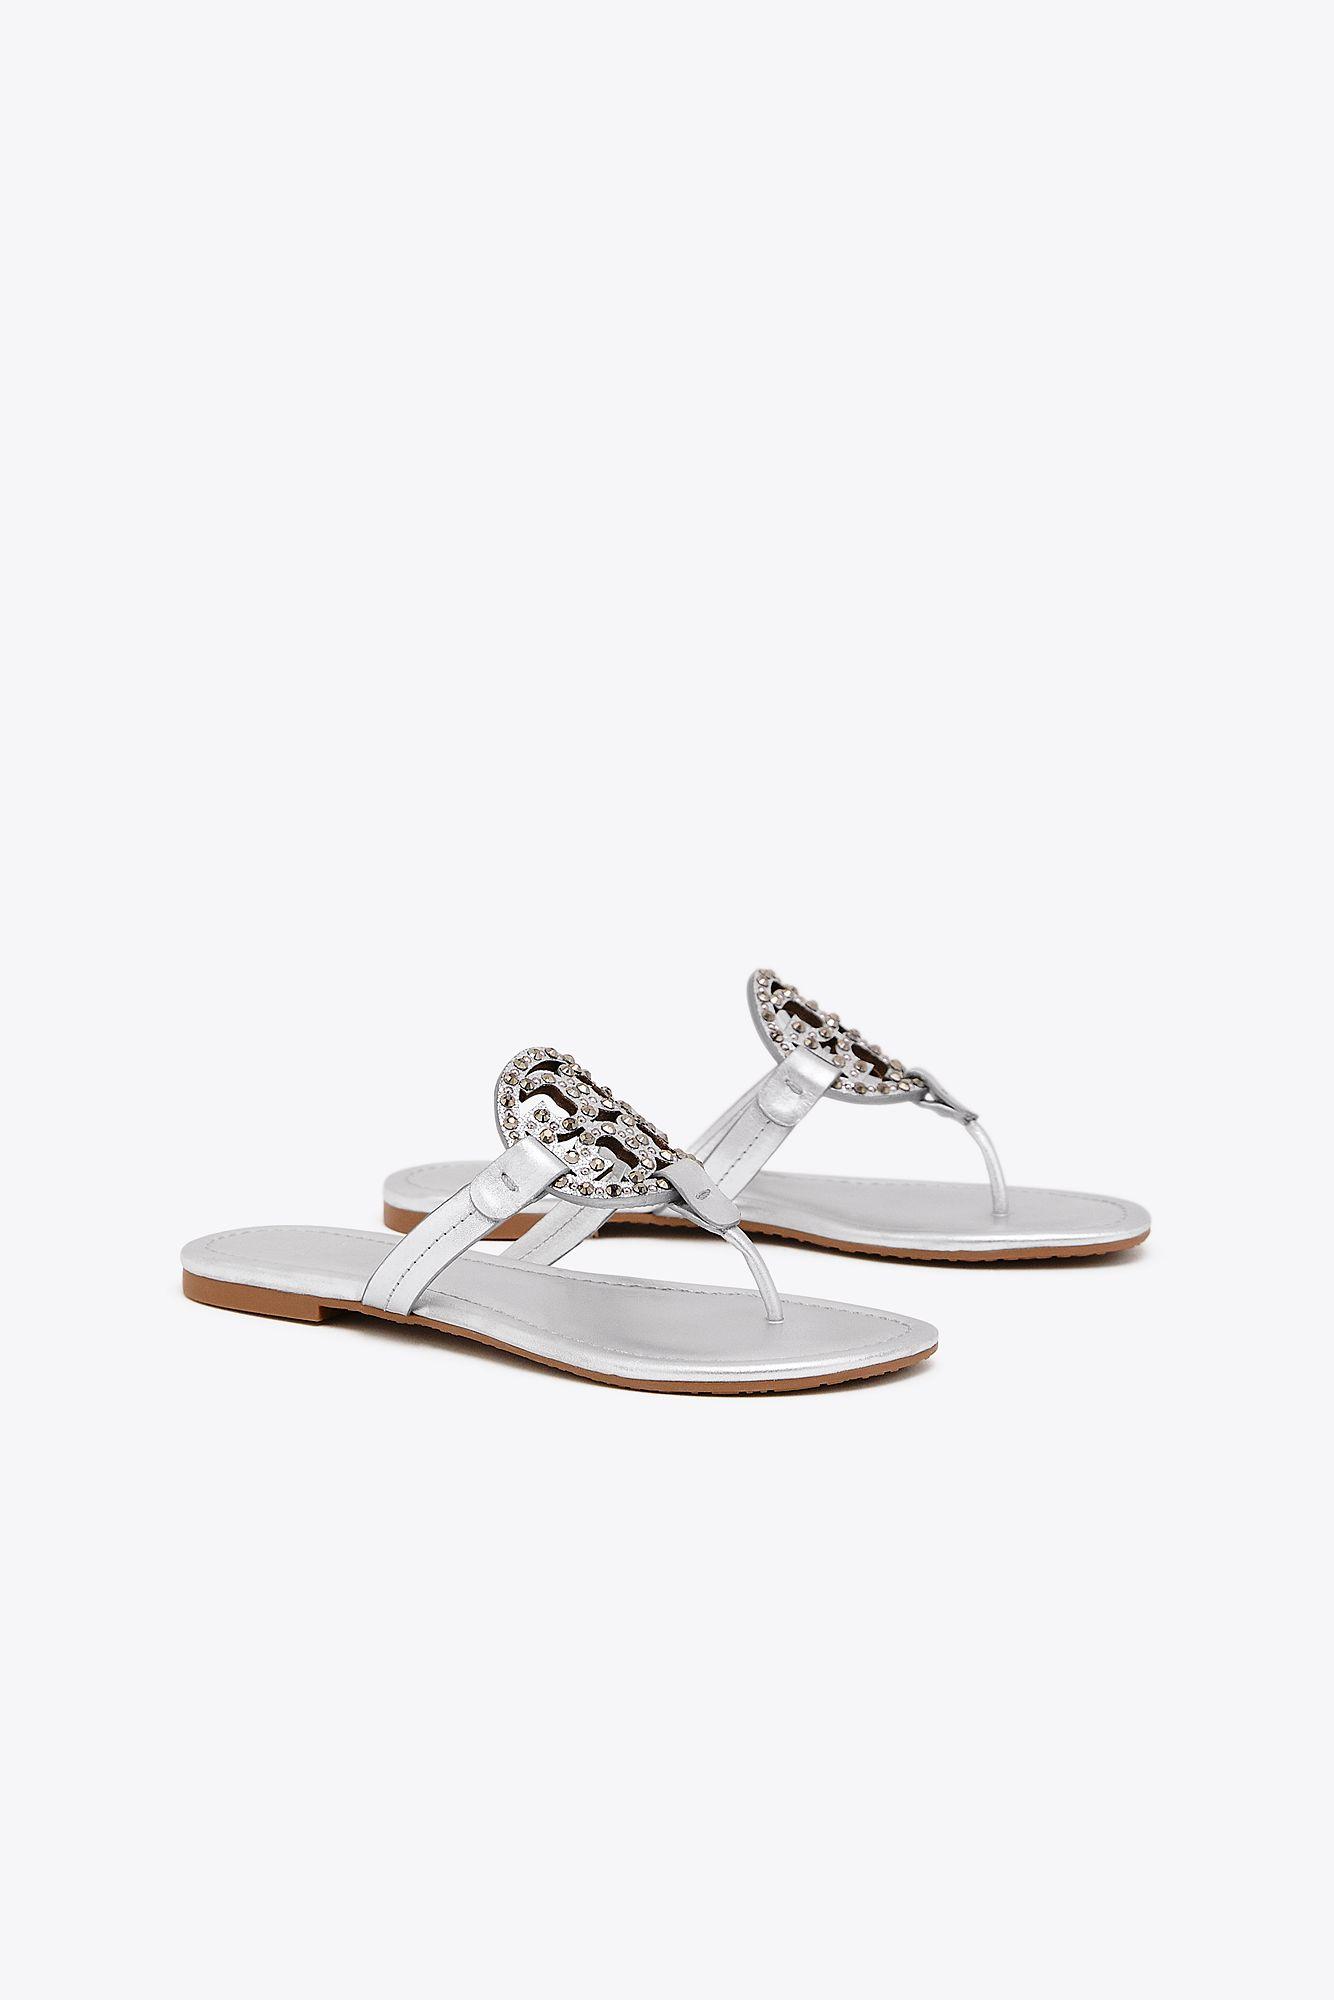 Tory Burch Leather Women's Miller Embellished Thong Sandals in 